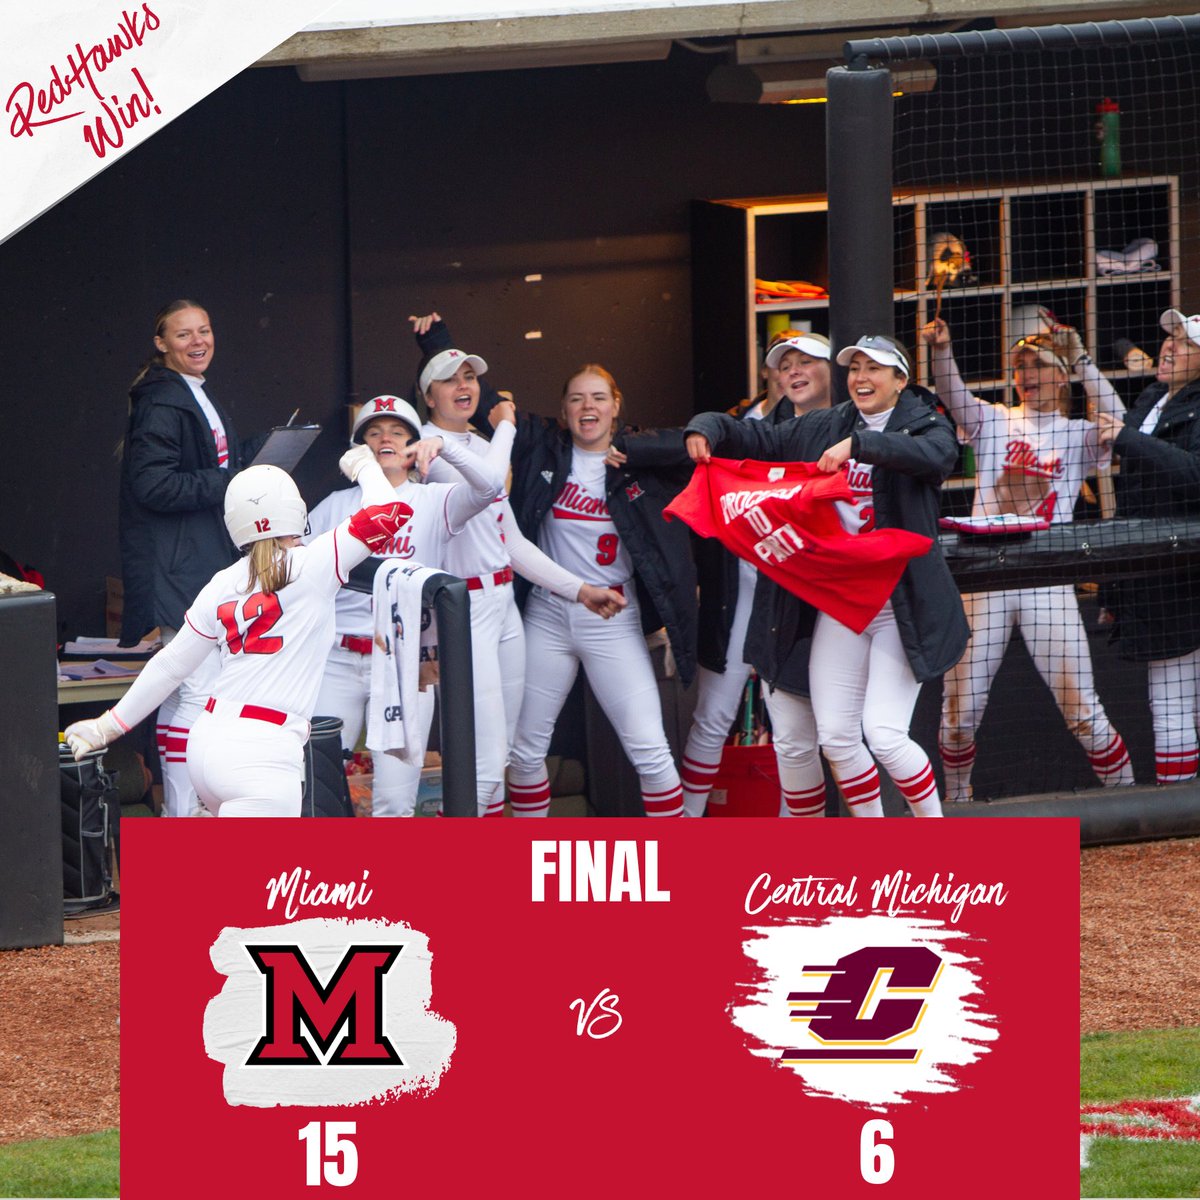 Let’s go RedHawks, another win to end the day!

#RiseUpRedHawks
🔴The RedHawks hit 7 extra-base hits, 4 of which were homers to total 11 homers on the day.
🔴Bewick hit 2 homers and went 2-for-3 at the plate, securing 5 RBI.
🔴6 different RedHawks had 2 hits.